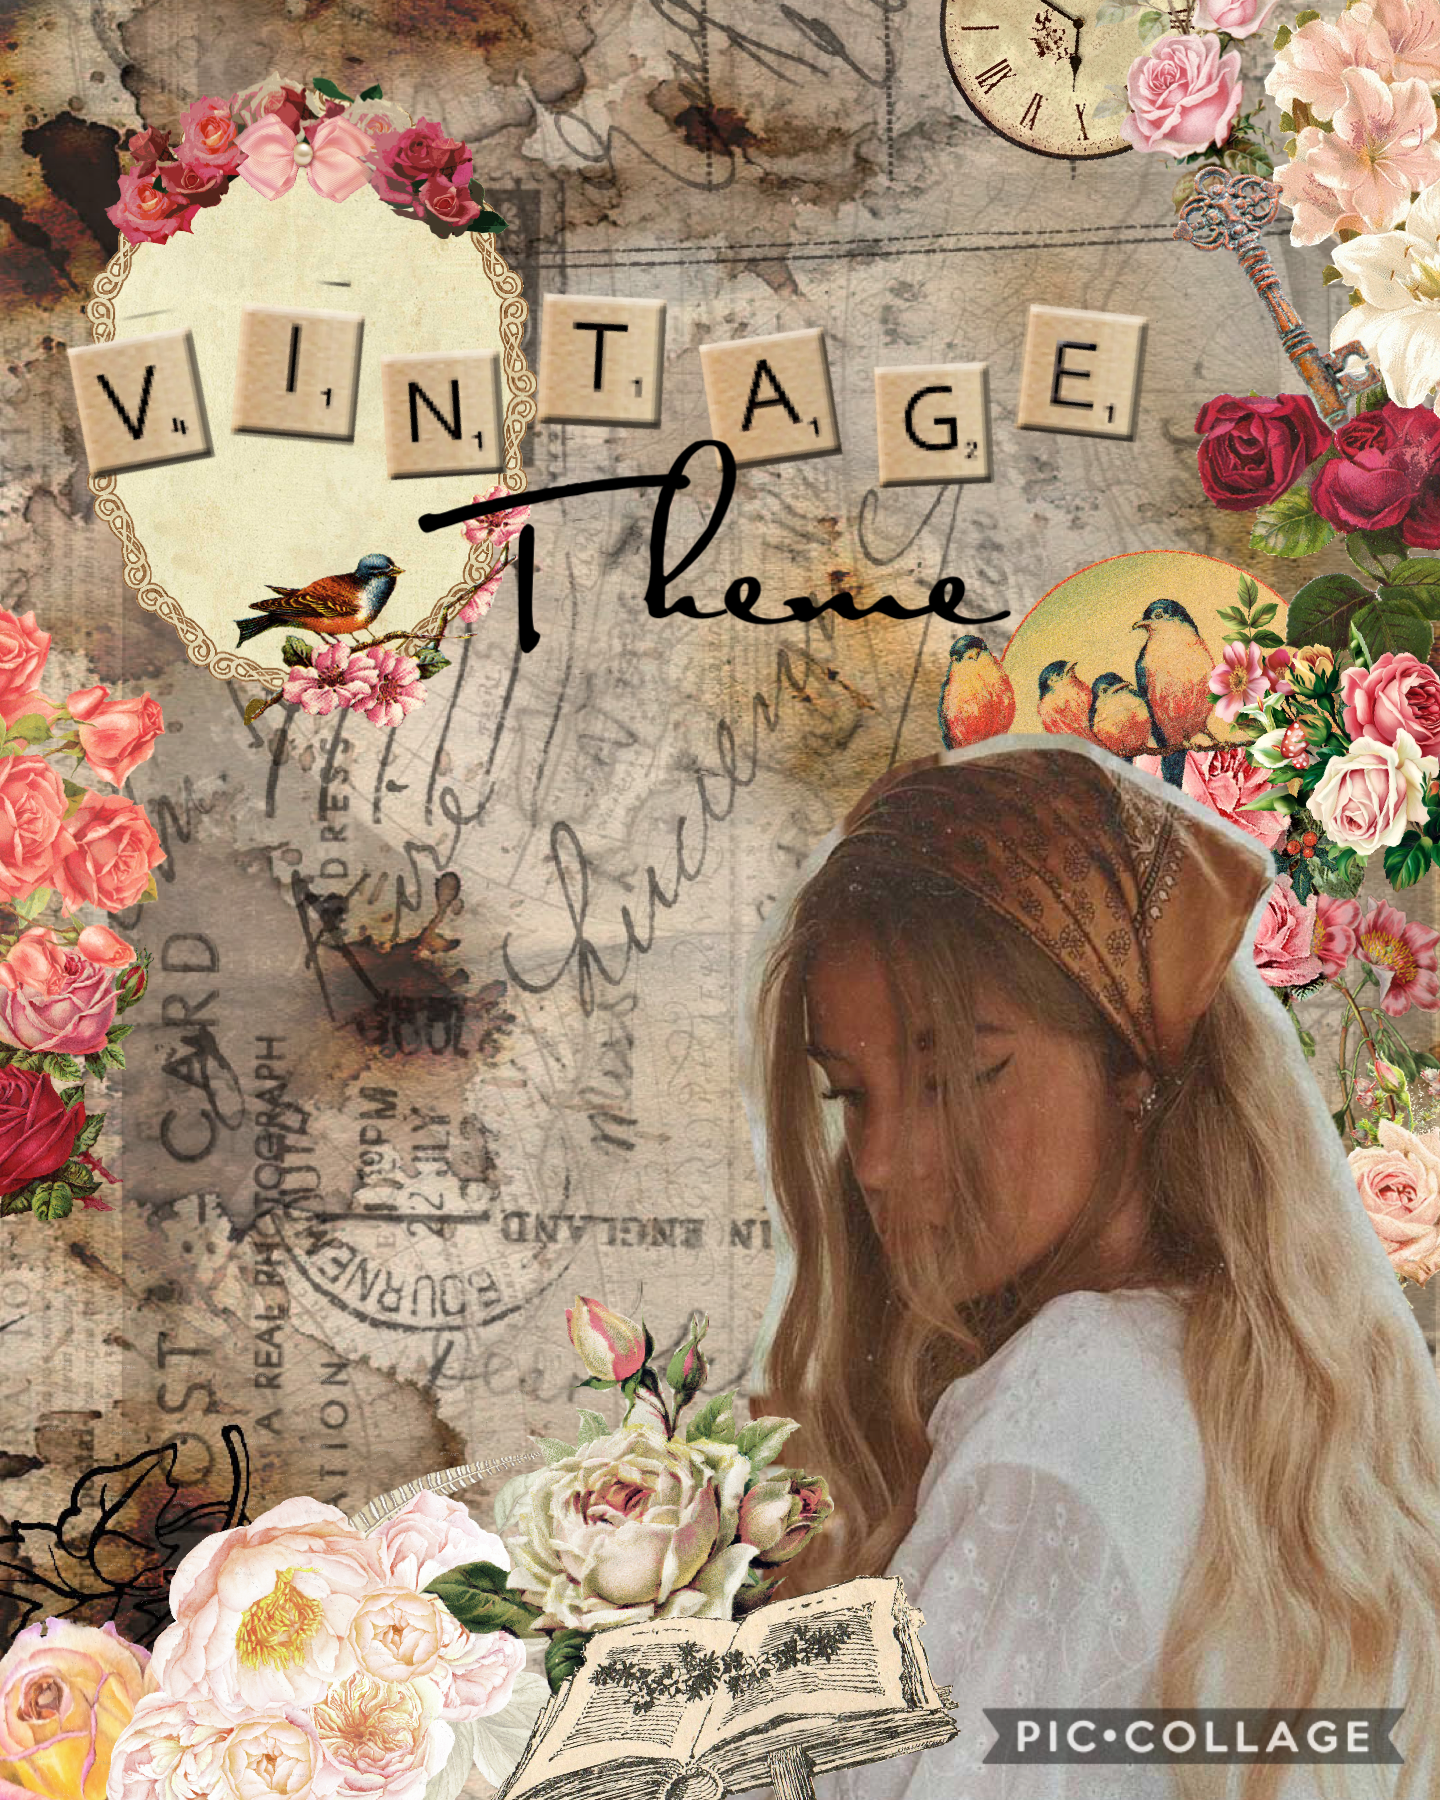 hi guys! i miss you guys so much. 🥺❤️ it’s been a while since I’ve checked piccollage. because of quarantine and all, I decided to create some collages following the vintage theme! hope you love them! 🥰